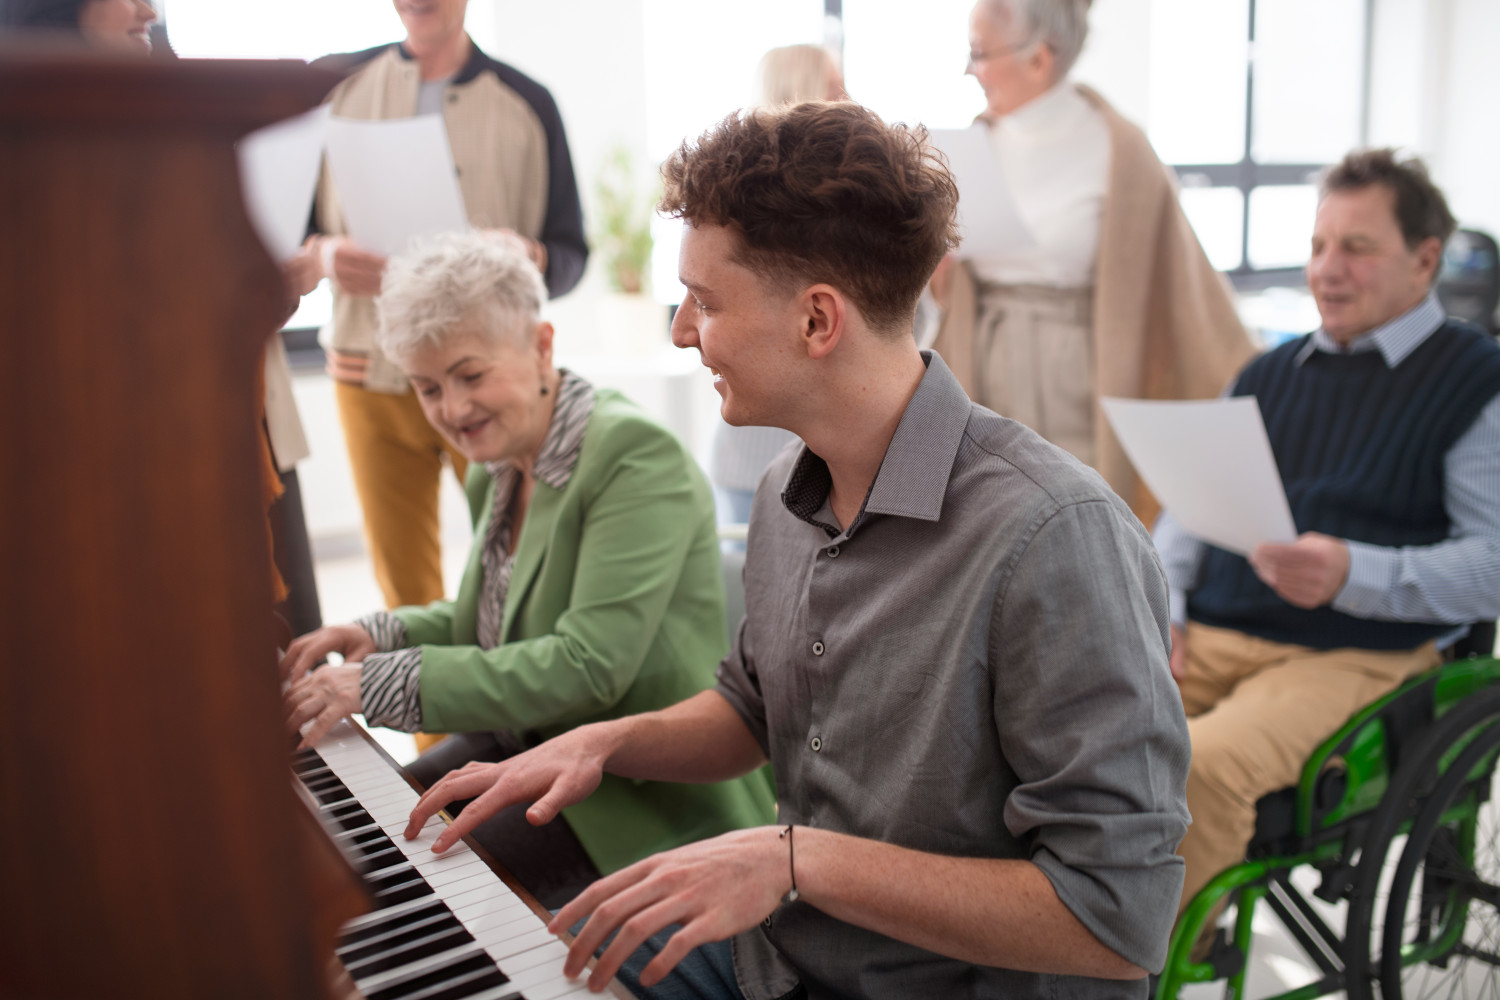 Music therapy group in aged care playing the piano together